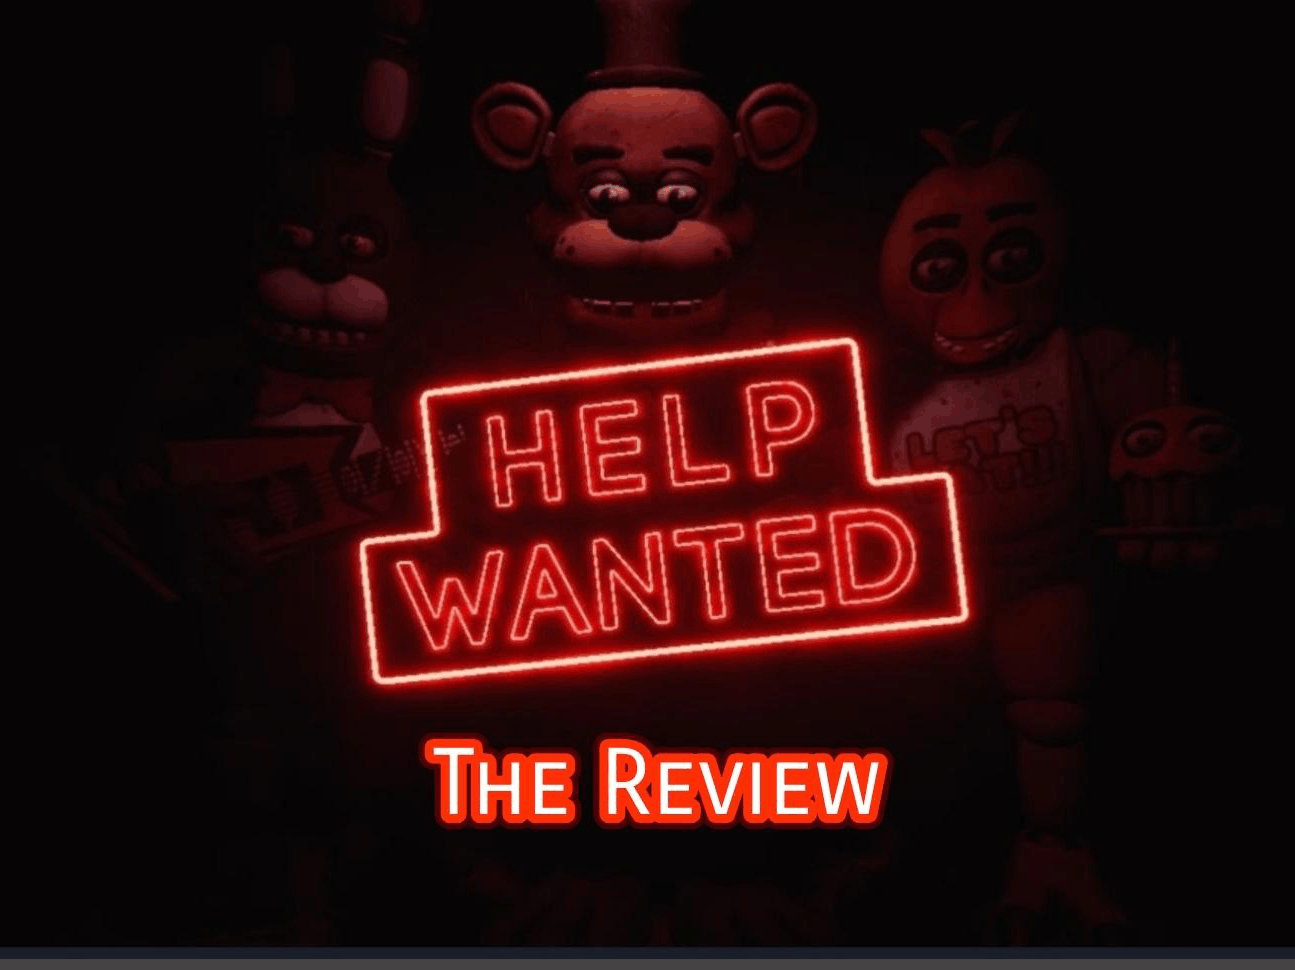 Sammon News on X: A poster for 'FIVE NIGHTS AT FREDDY'S: HELP WANTED 2'  has been released. #FNAF #FNAFHelpWanted2 The game releases December 2023  on PSVR2 and PC.  / X